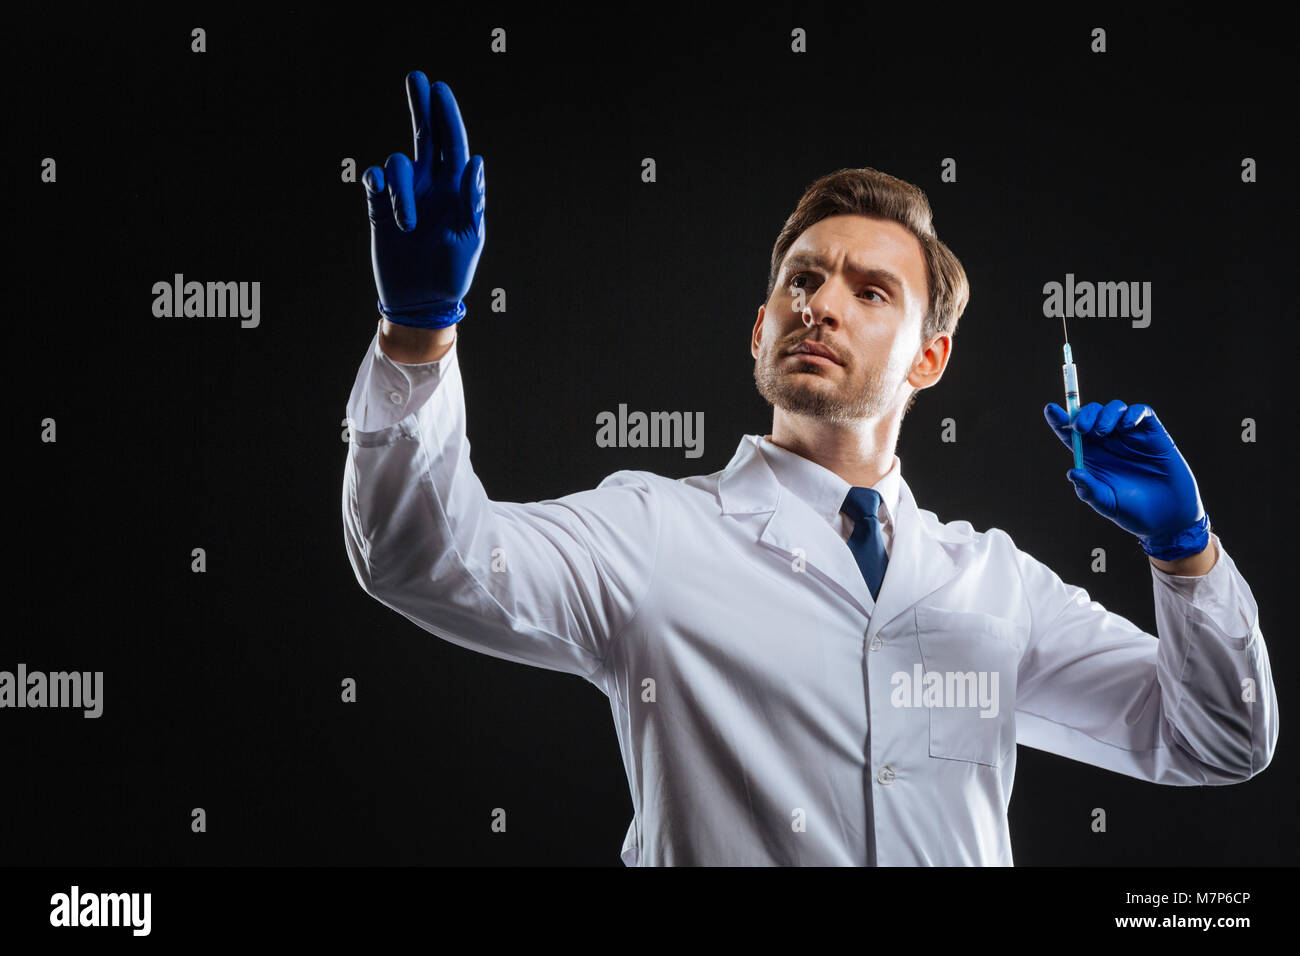 Responsible attentive medic holding a syringe lifting his hand. Stock Photo